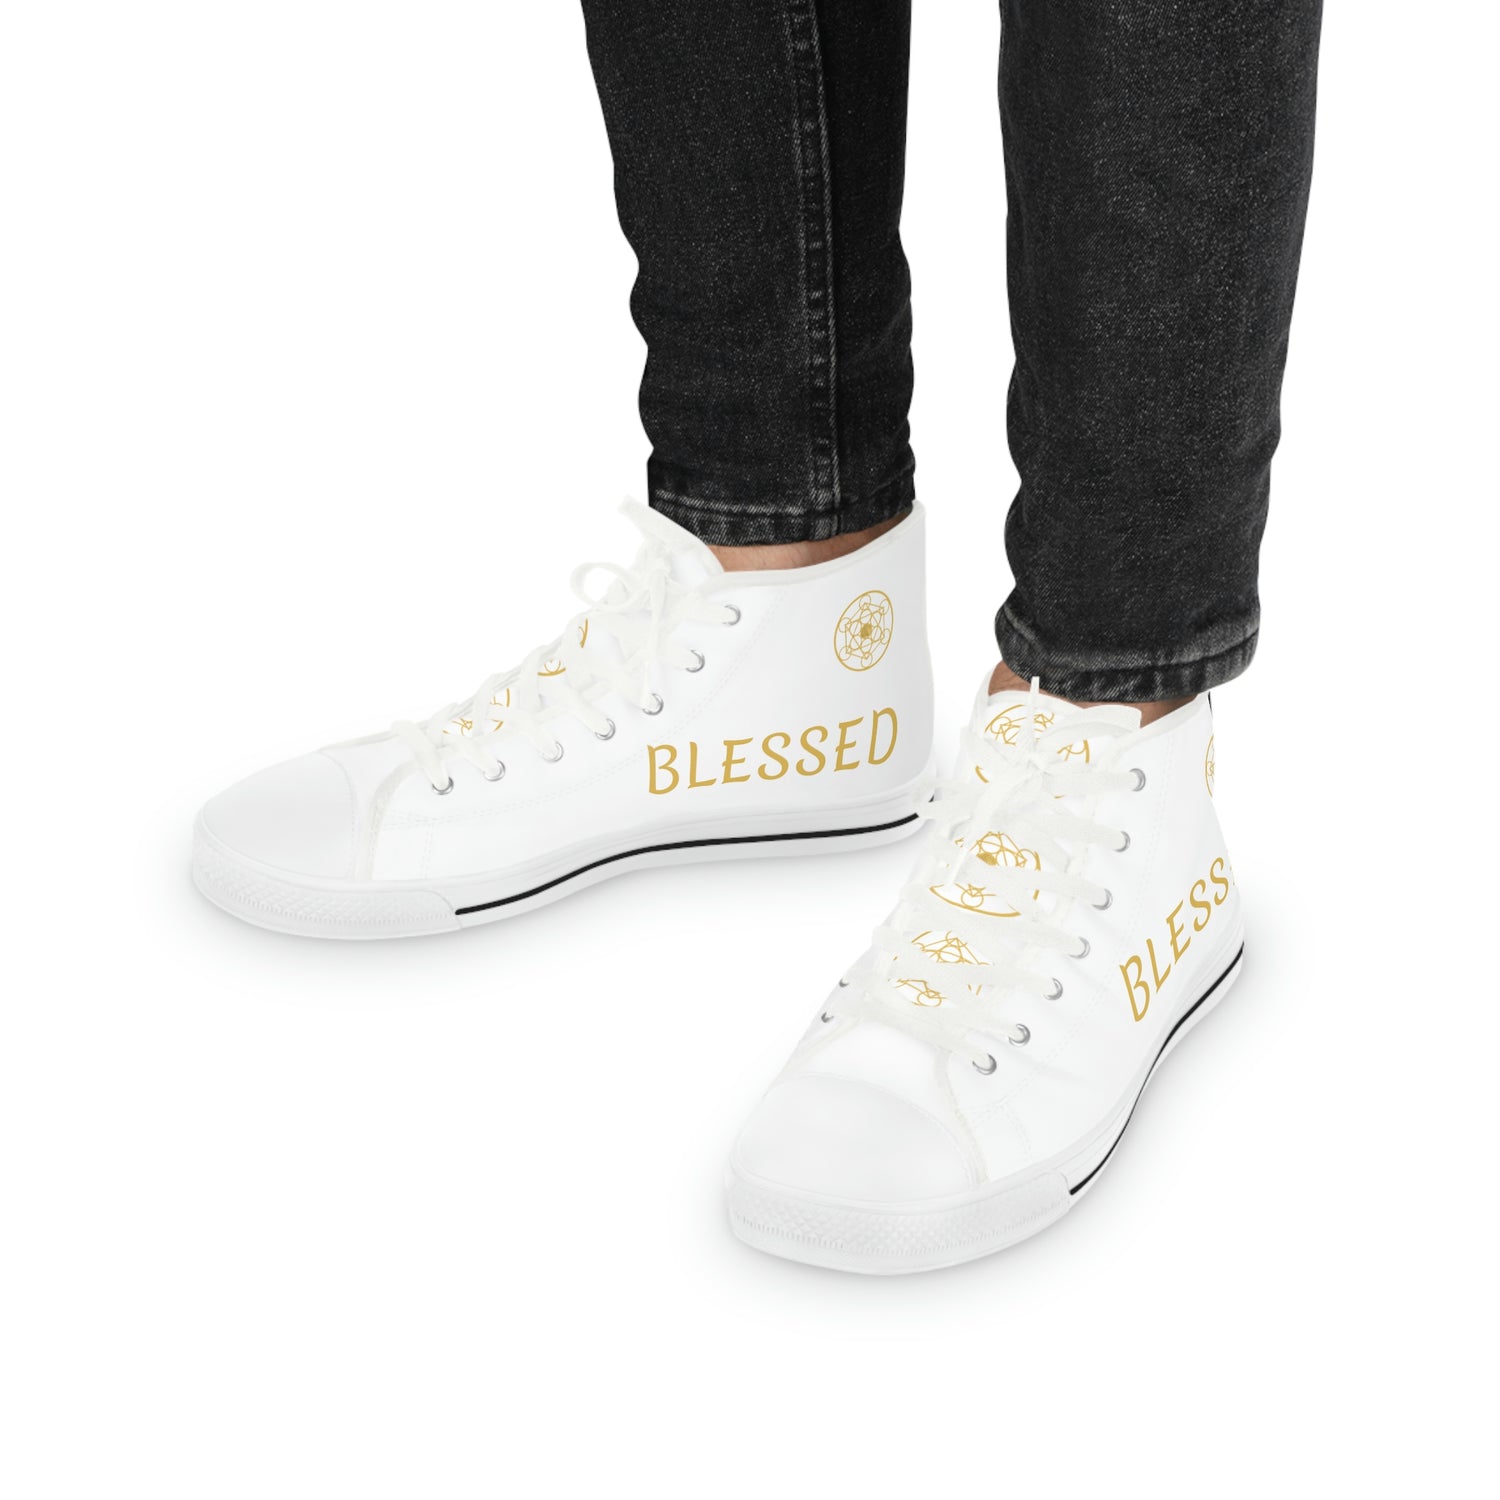 Blessed DYNYSTY - Men's High Top Sneakers - White